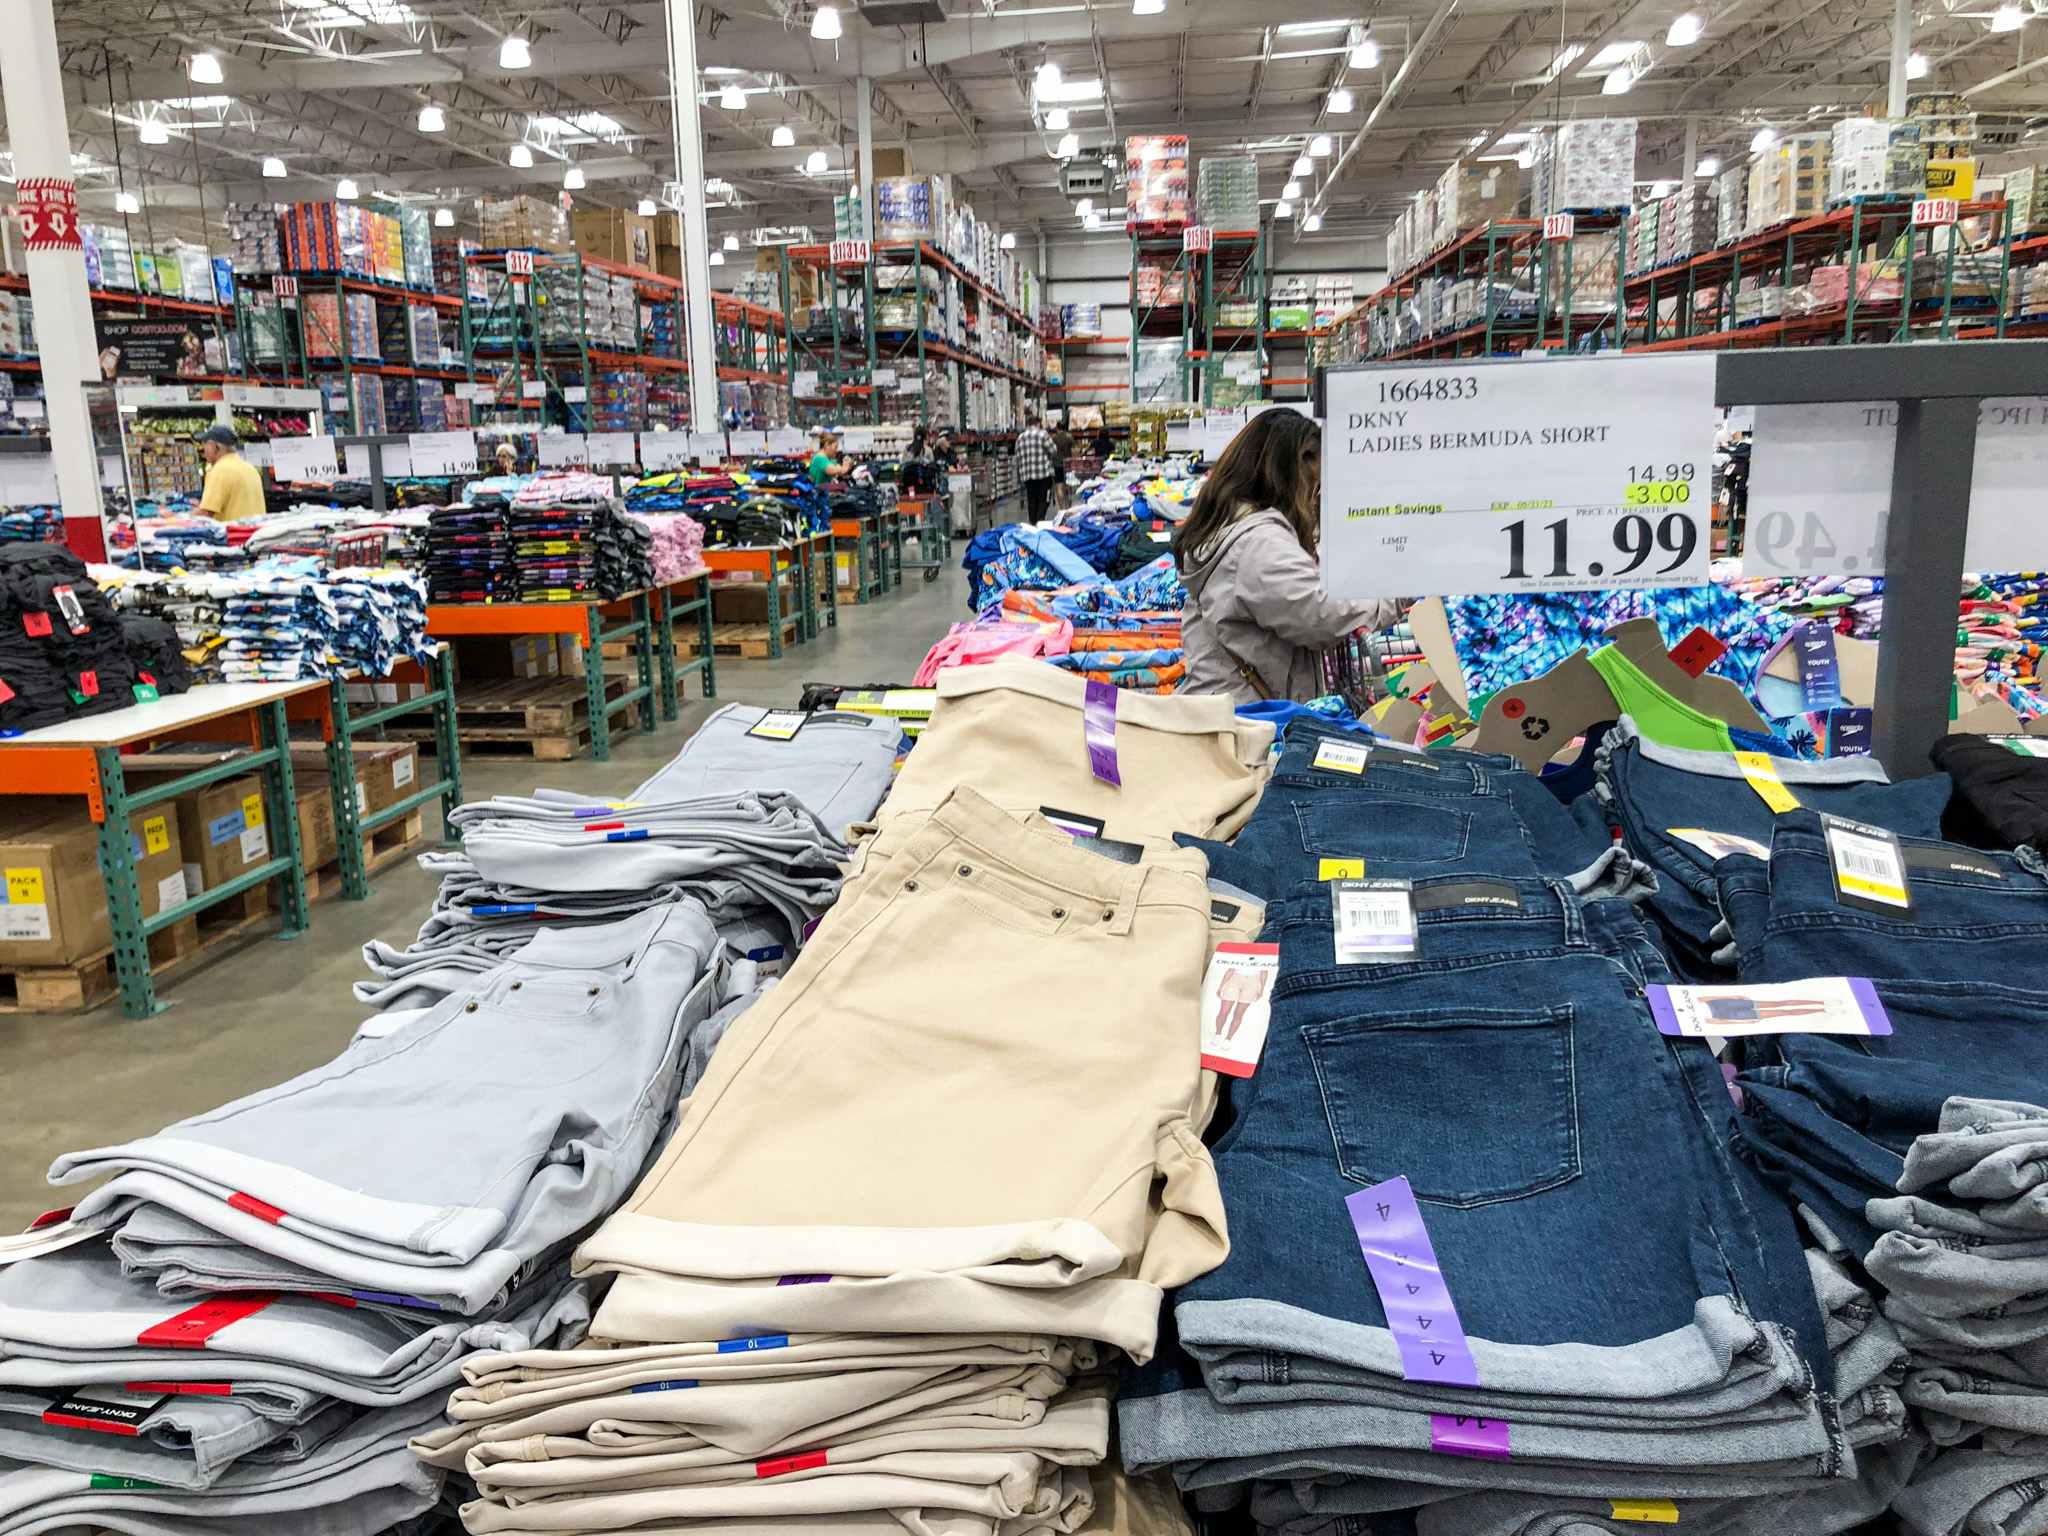 piles of bermuda shorts with a sign for 11.99